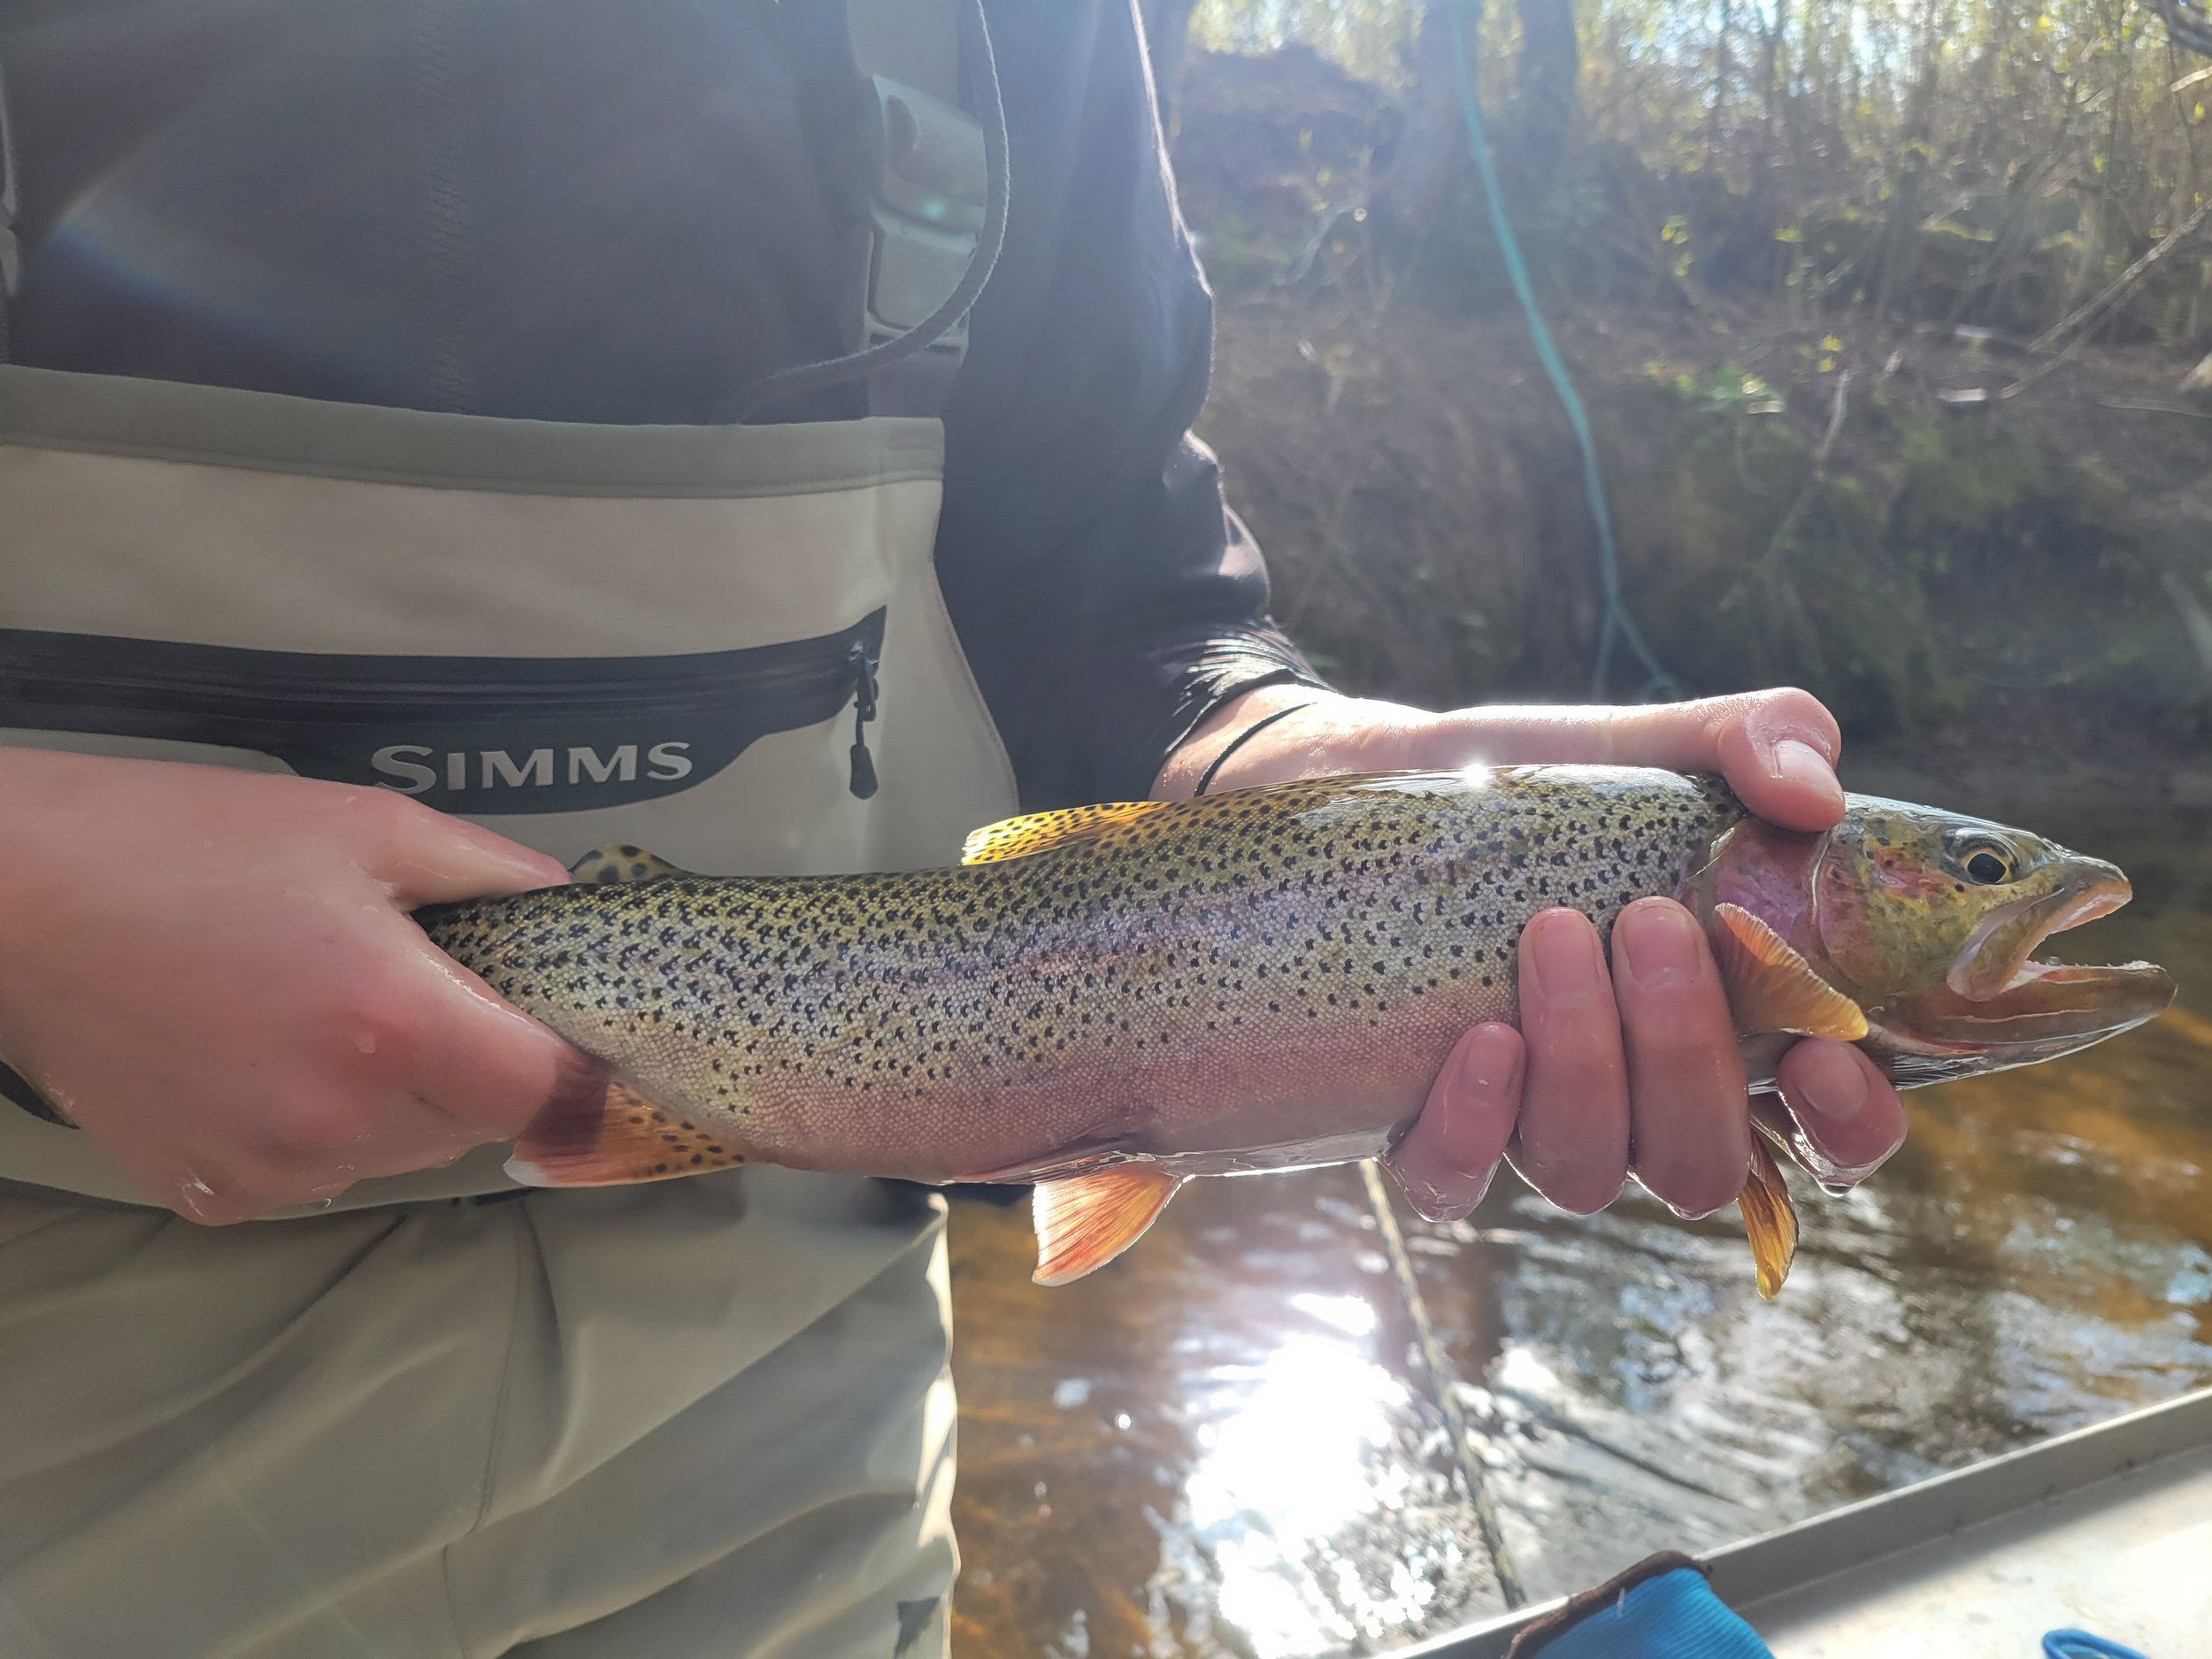 Identifying Cutthroat Trout caught in fry out migration trap inScully Creek